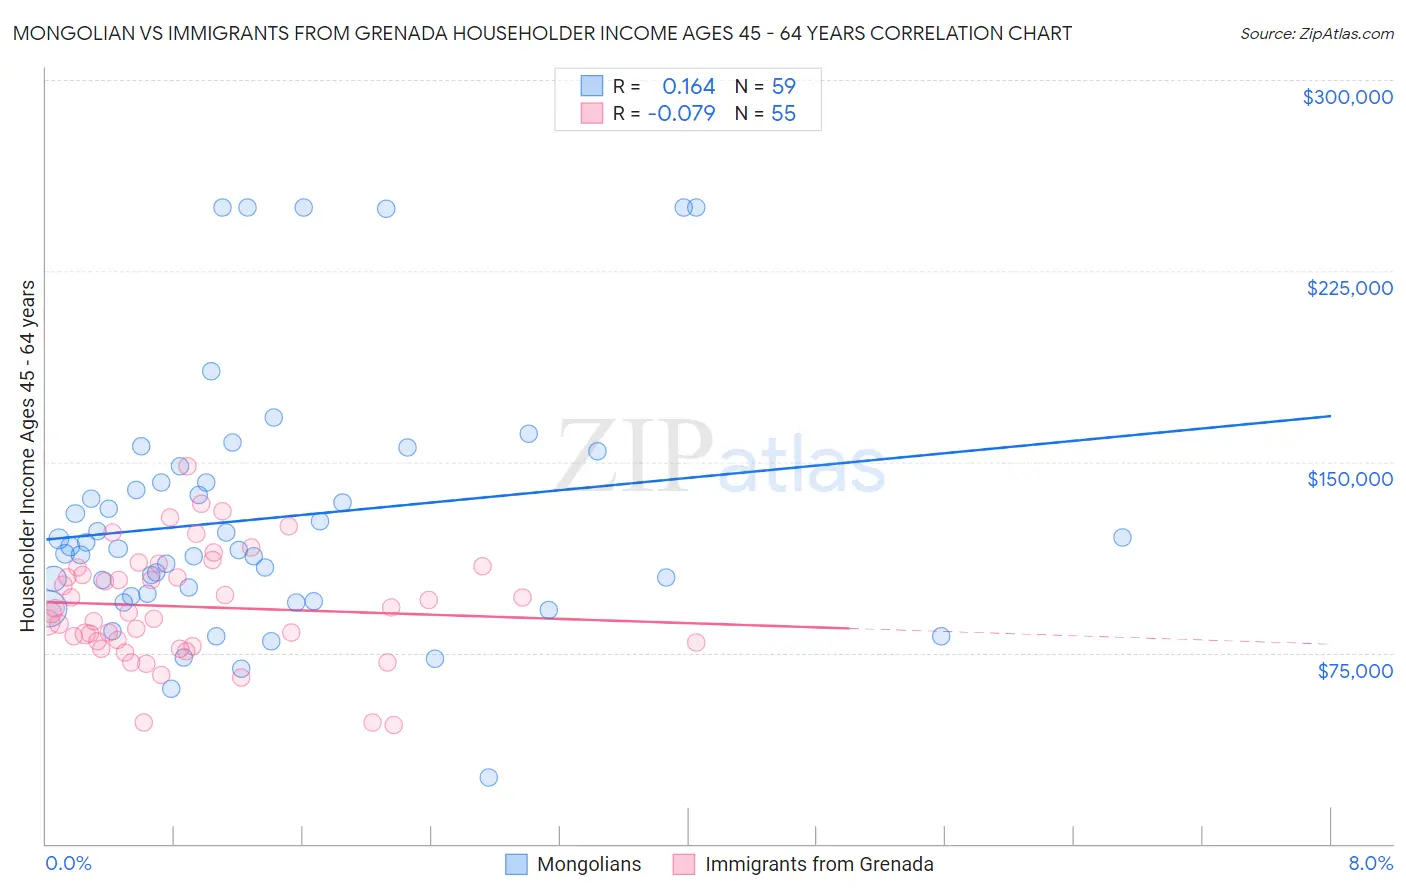 Mongolian vs Immigrants from Grenada Householder Income Ages 45 - 64 years